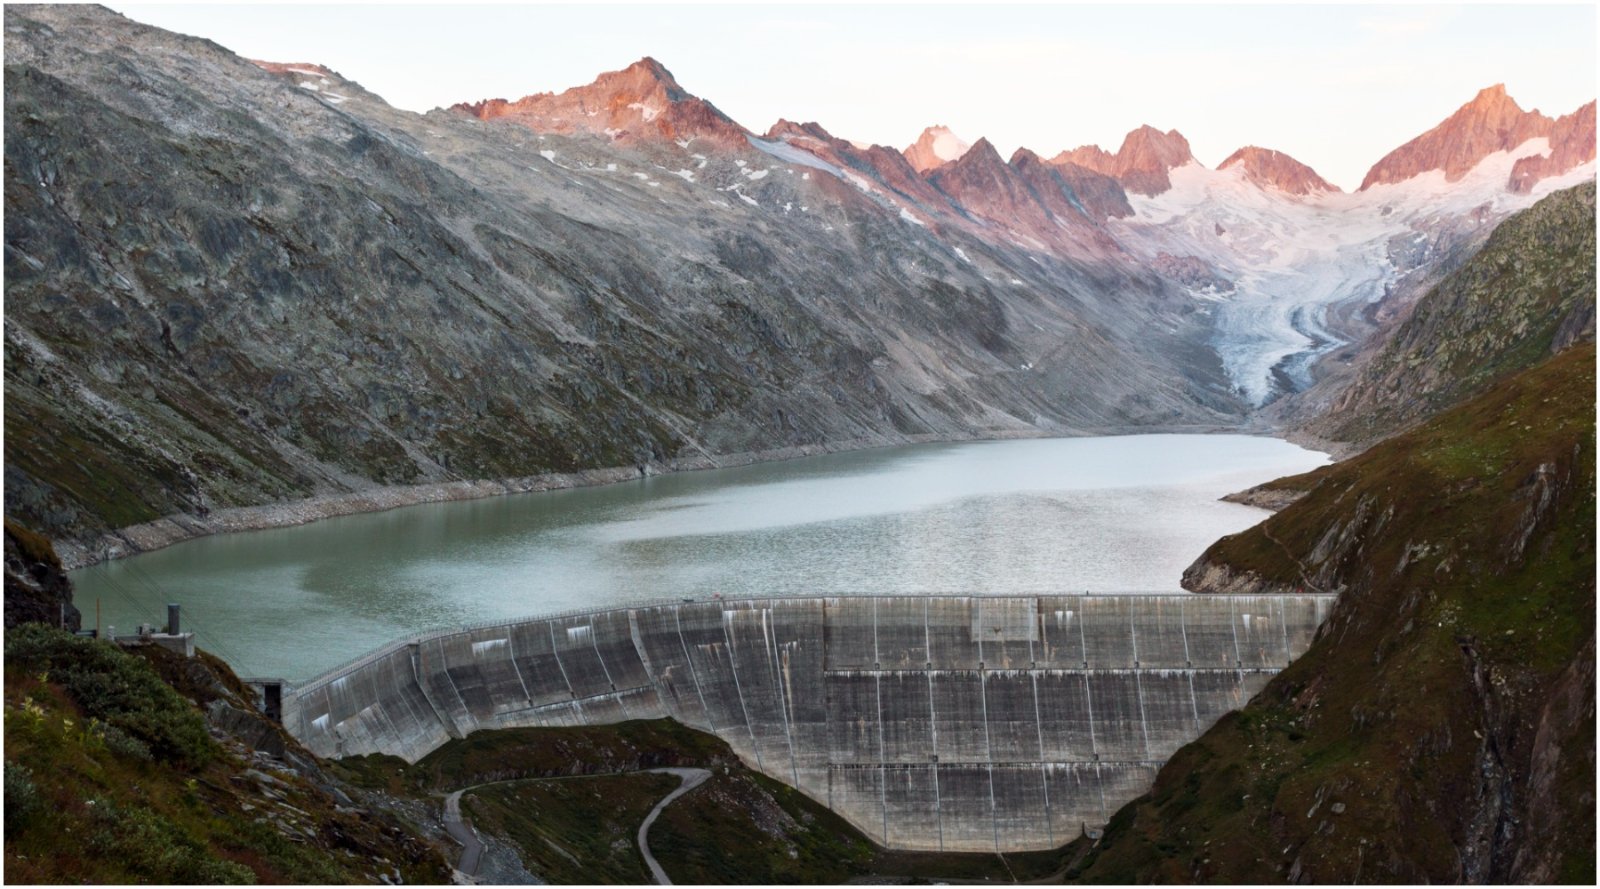 Switzerland is considering building new hydroelectric power stations to protect itself from the European energy crisis